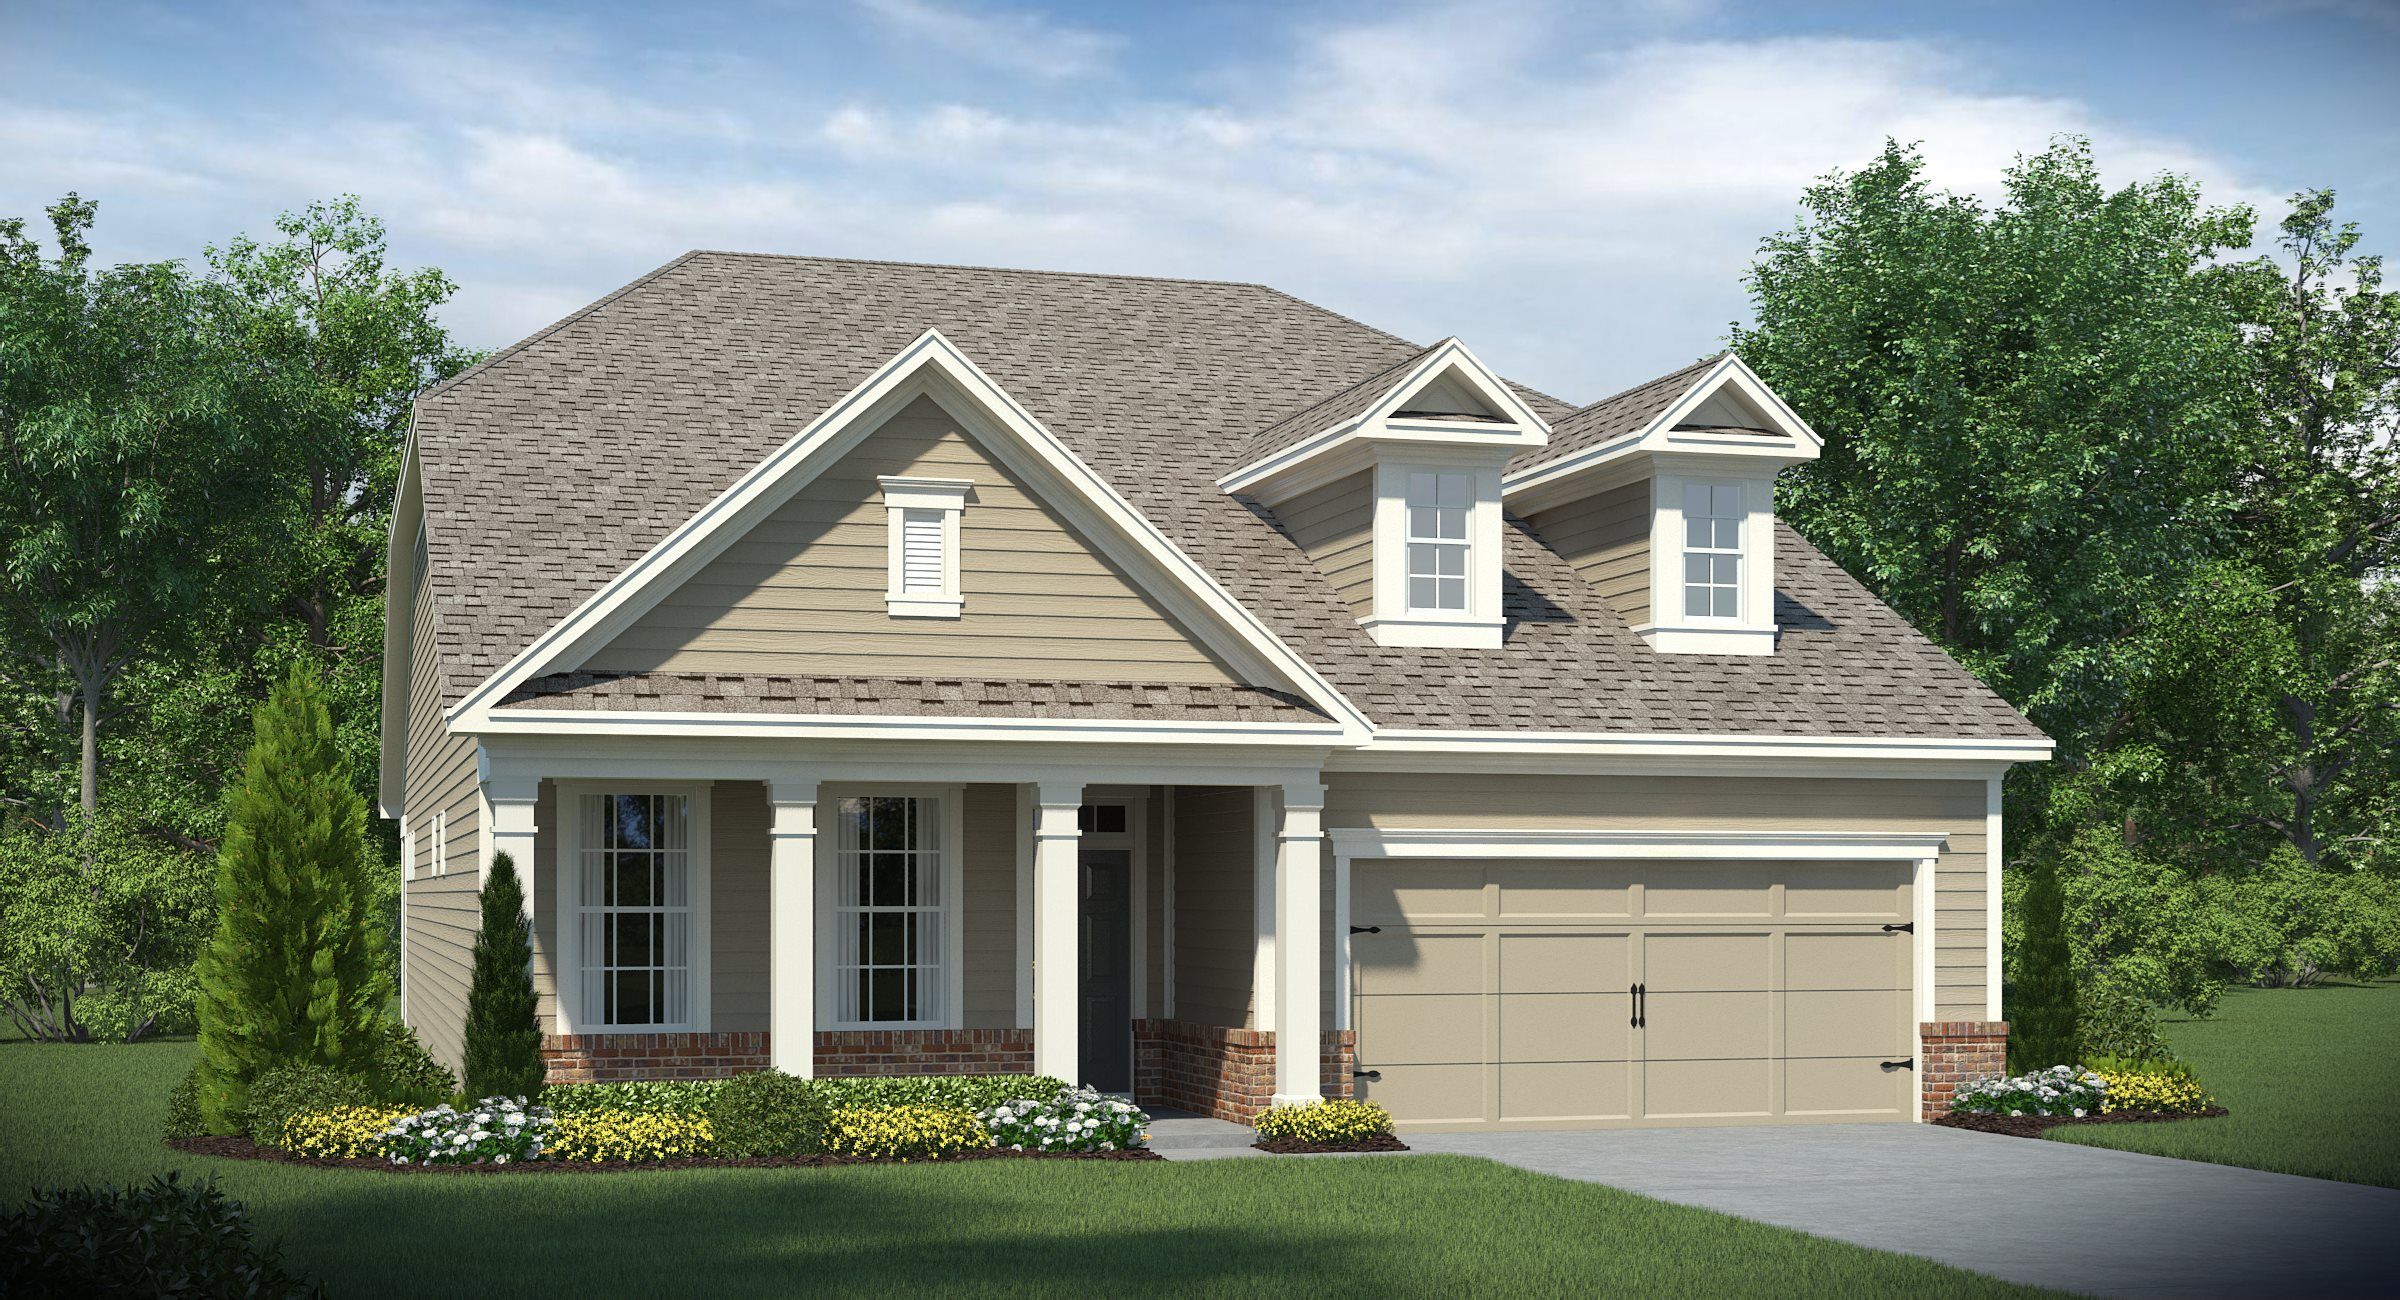 Fairfield Plan at Hickory Bluffs in Canton, GA by Lennar